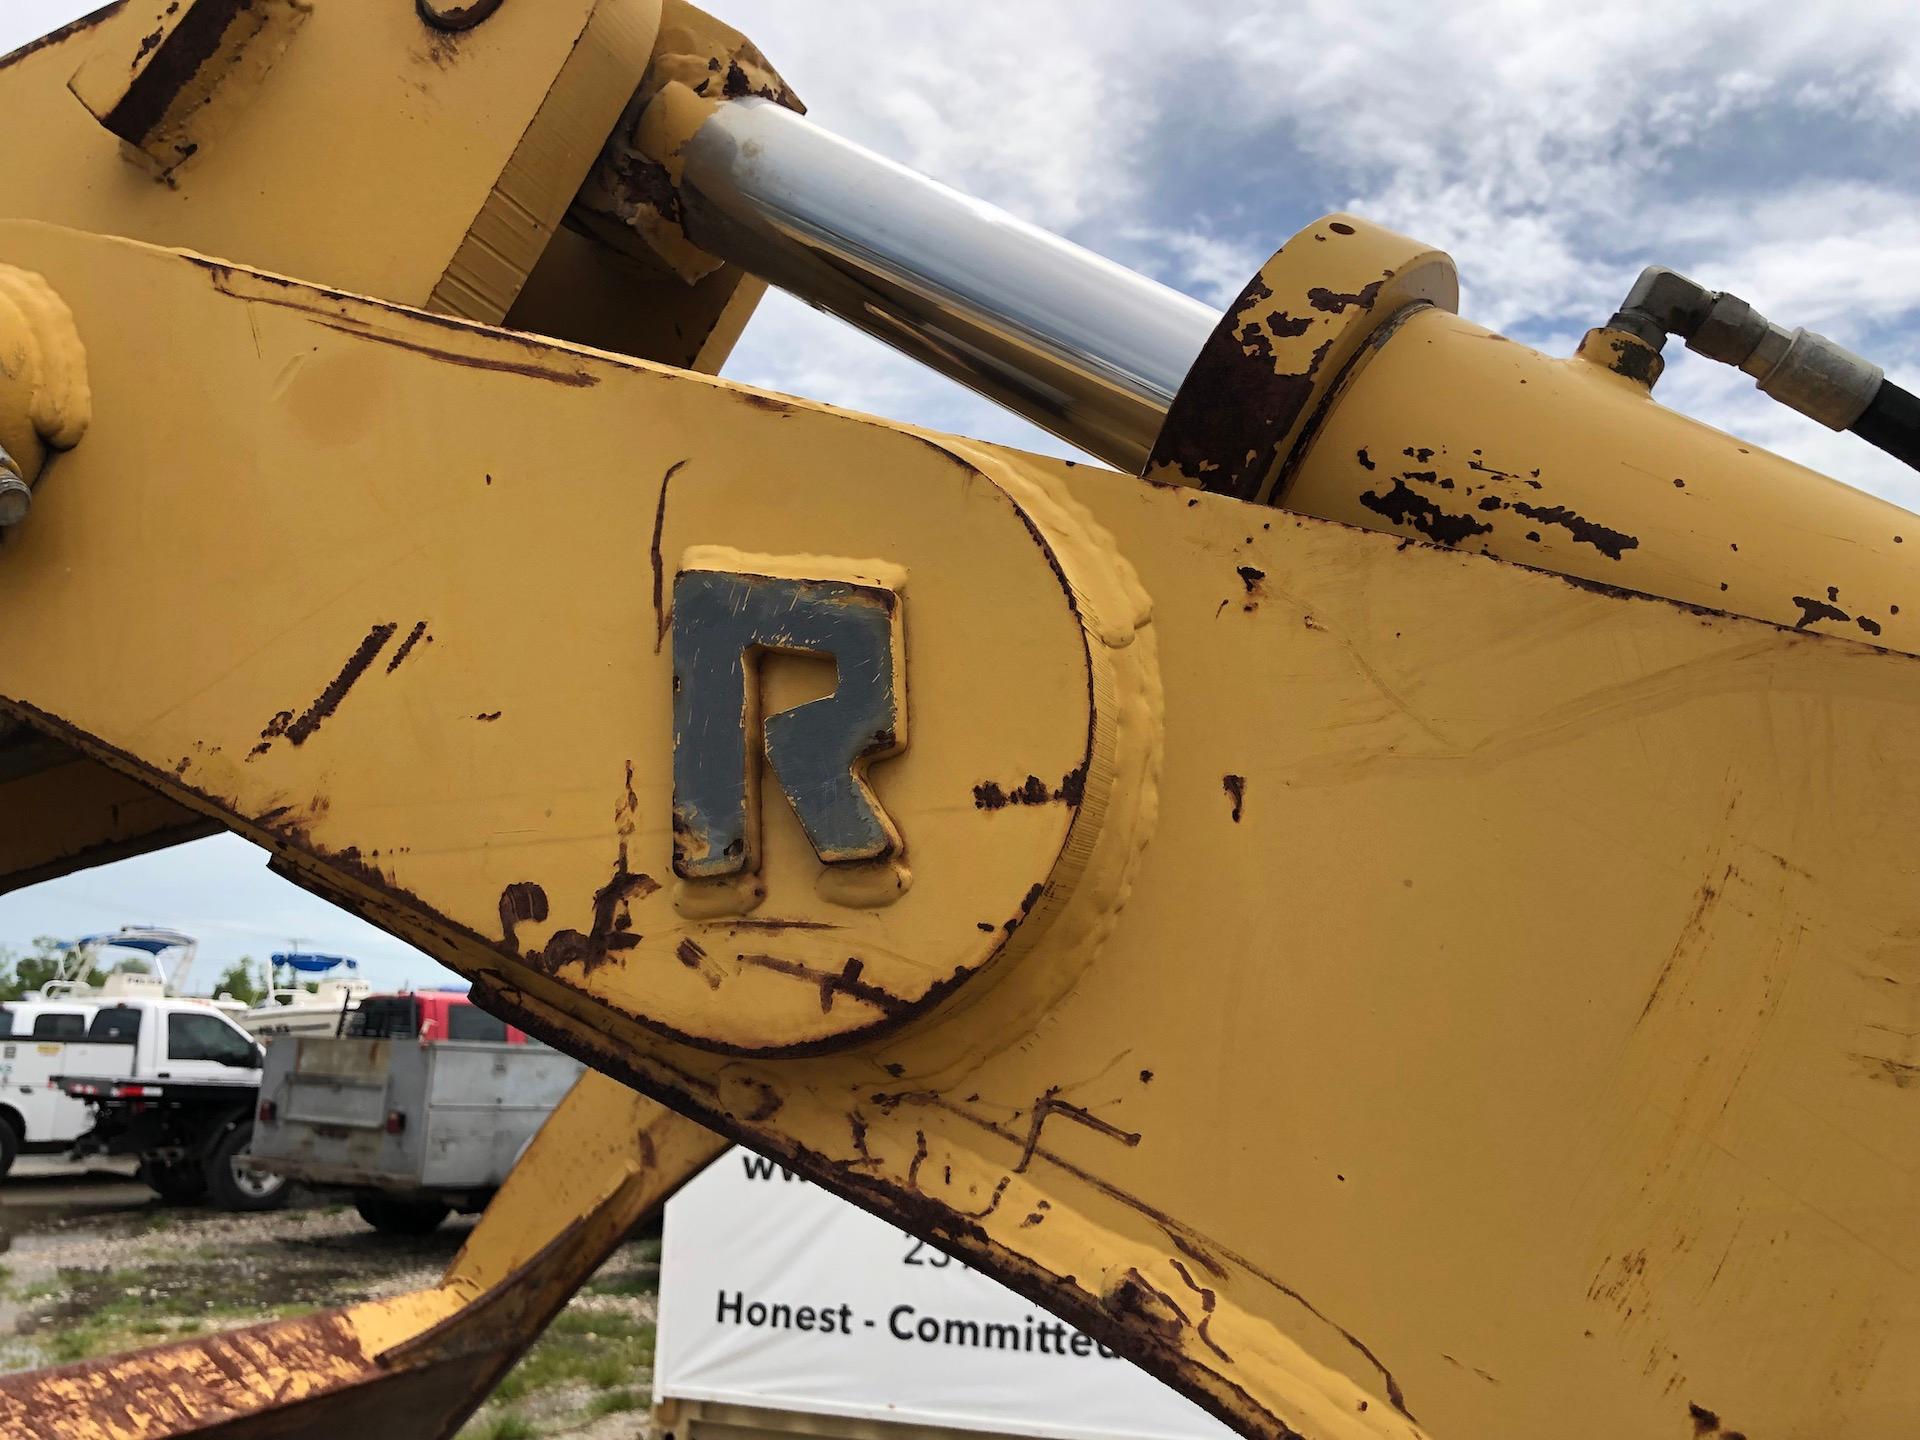 Rockland YM 966K Grapple For Caterpillar 966K